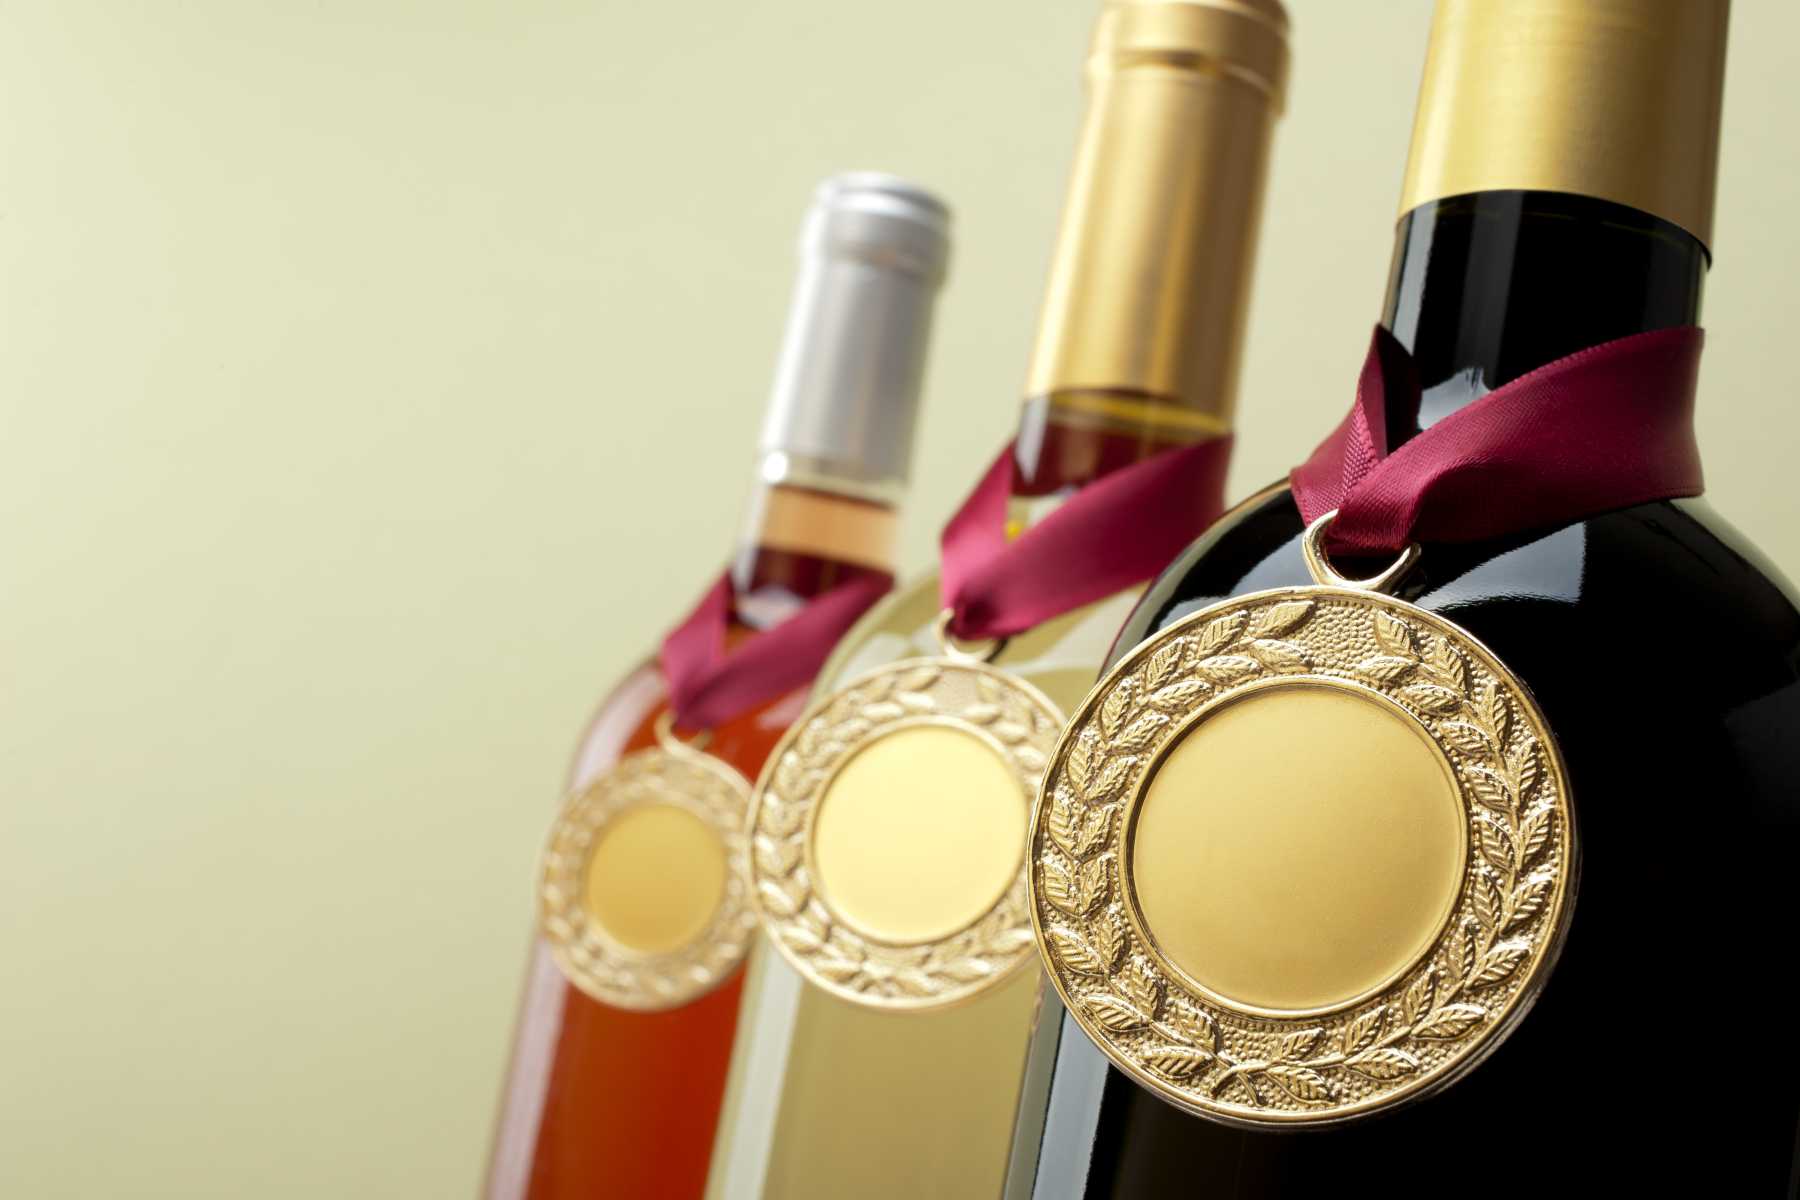 different kinds of wine bottles with wine medals